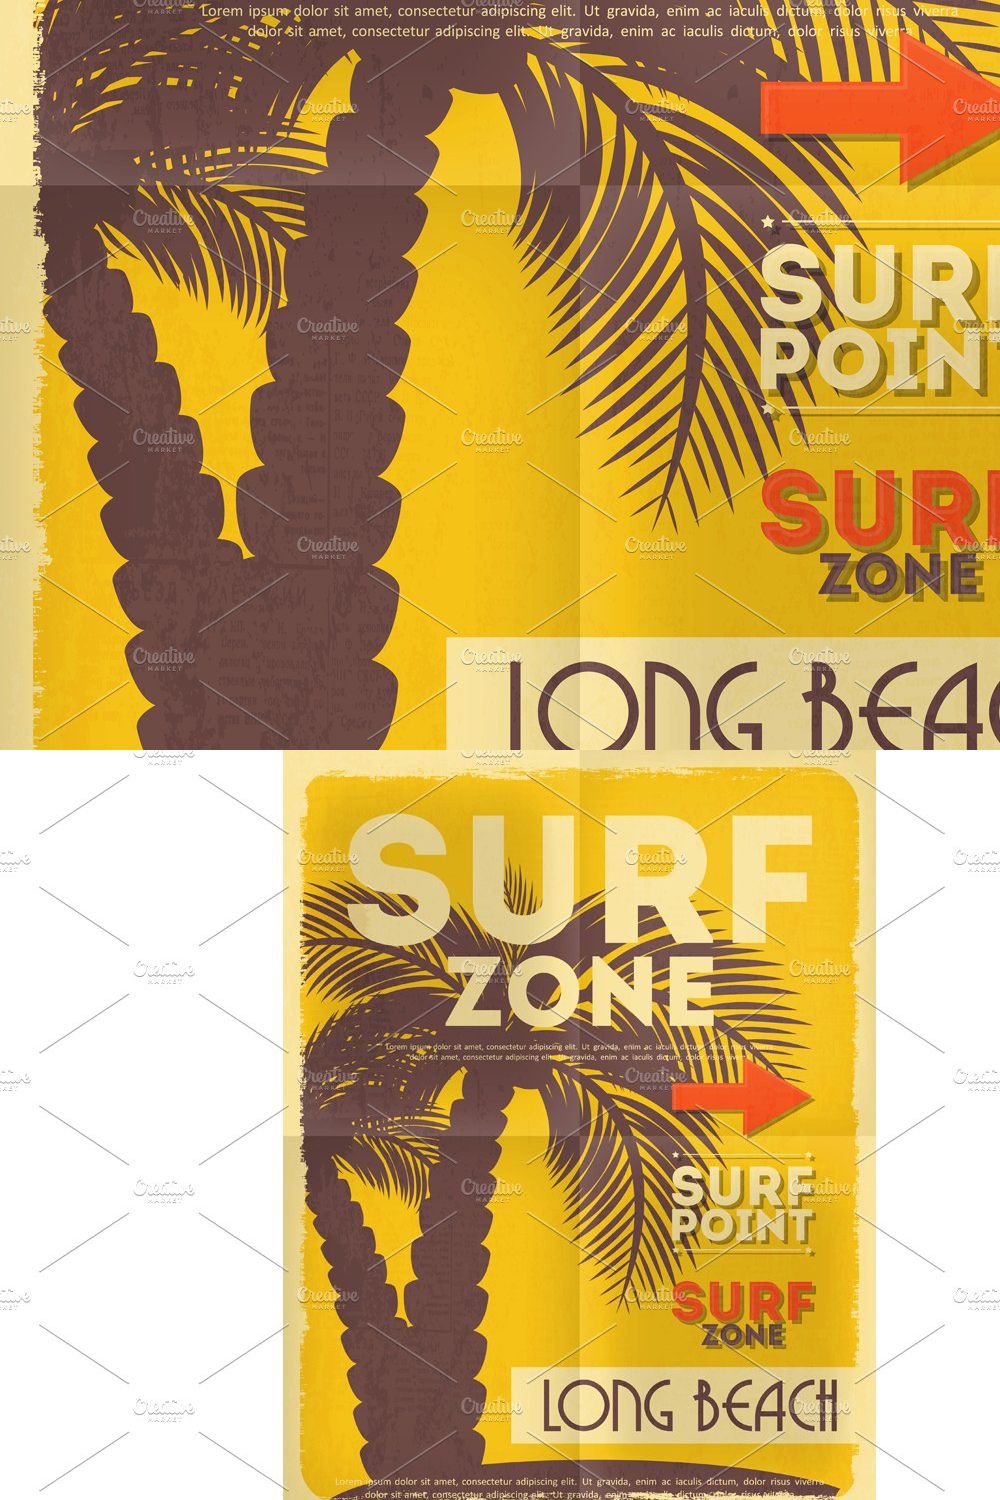 surfing poster pinterest preview image.